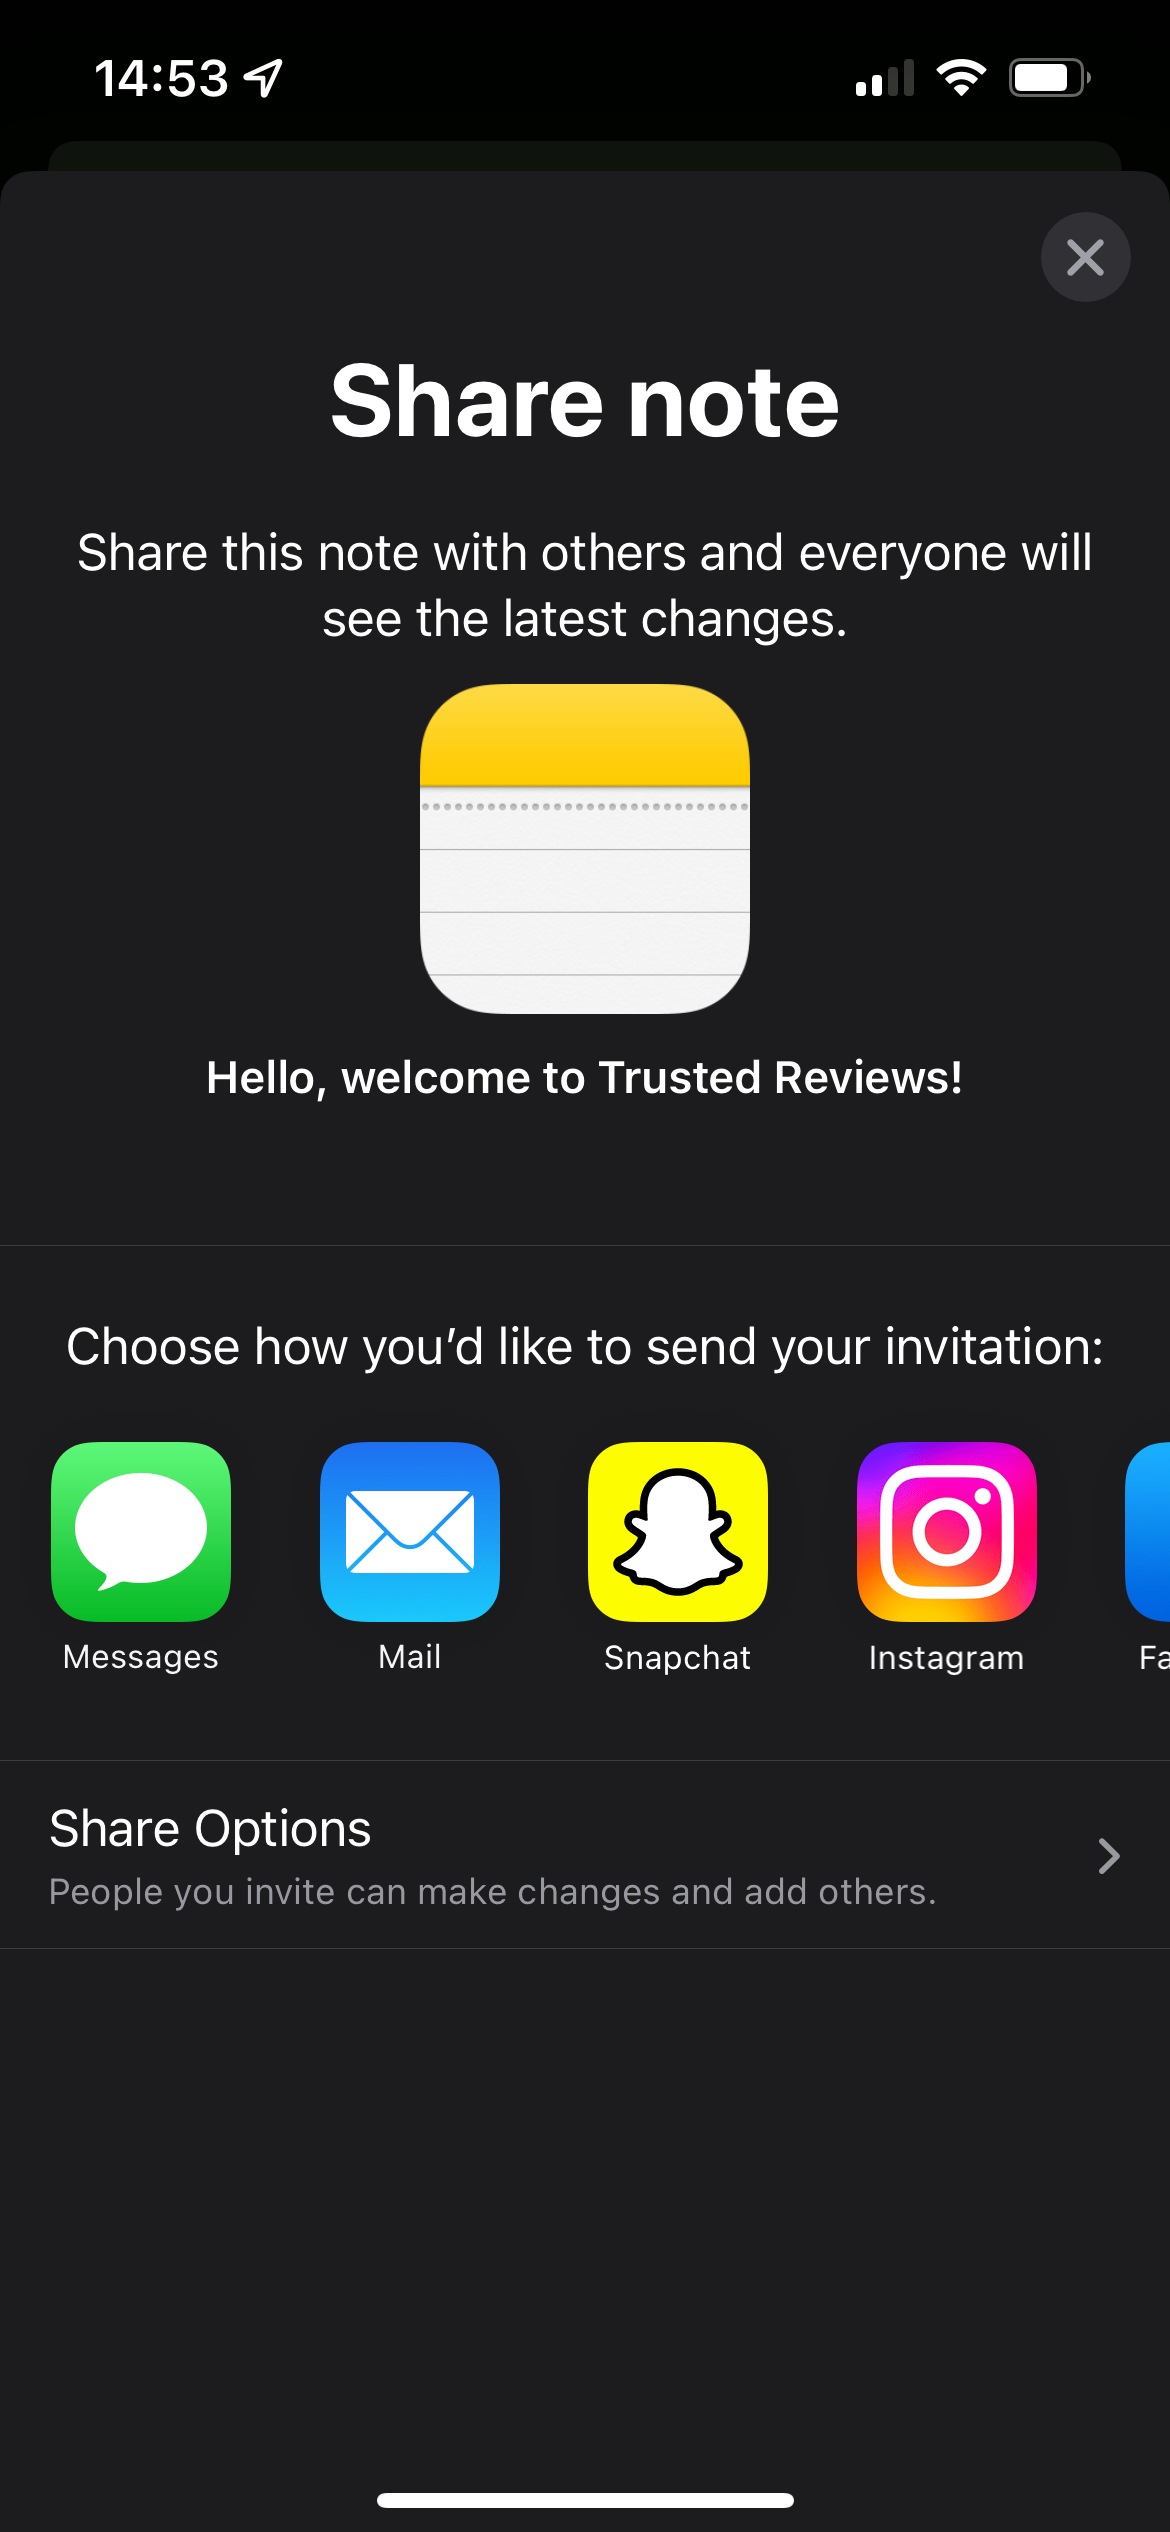 How to share notes on iPhone